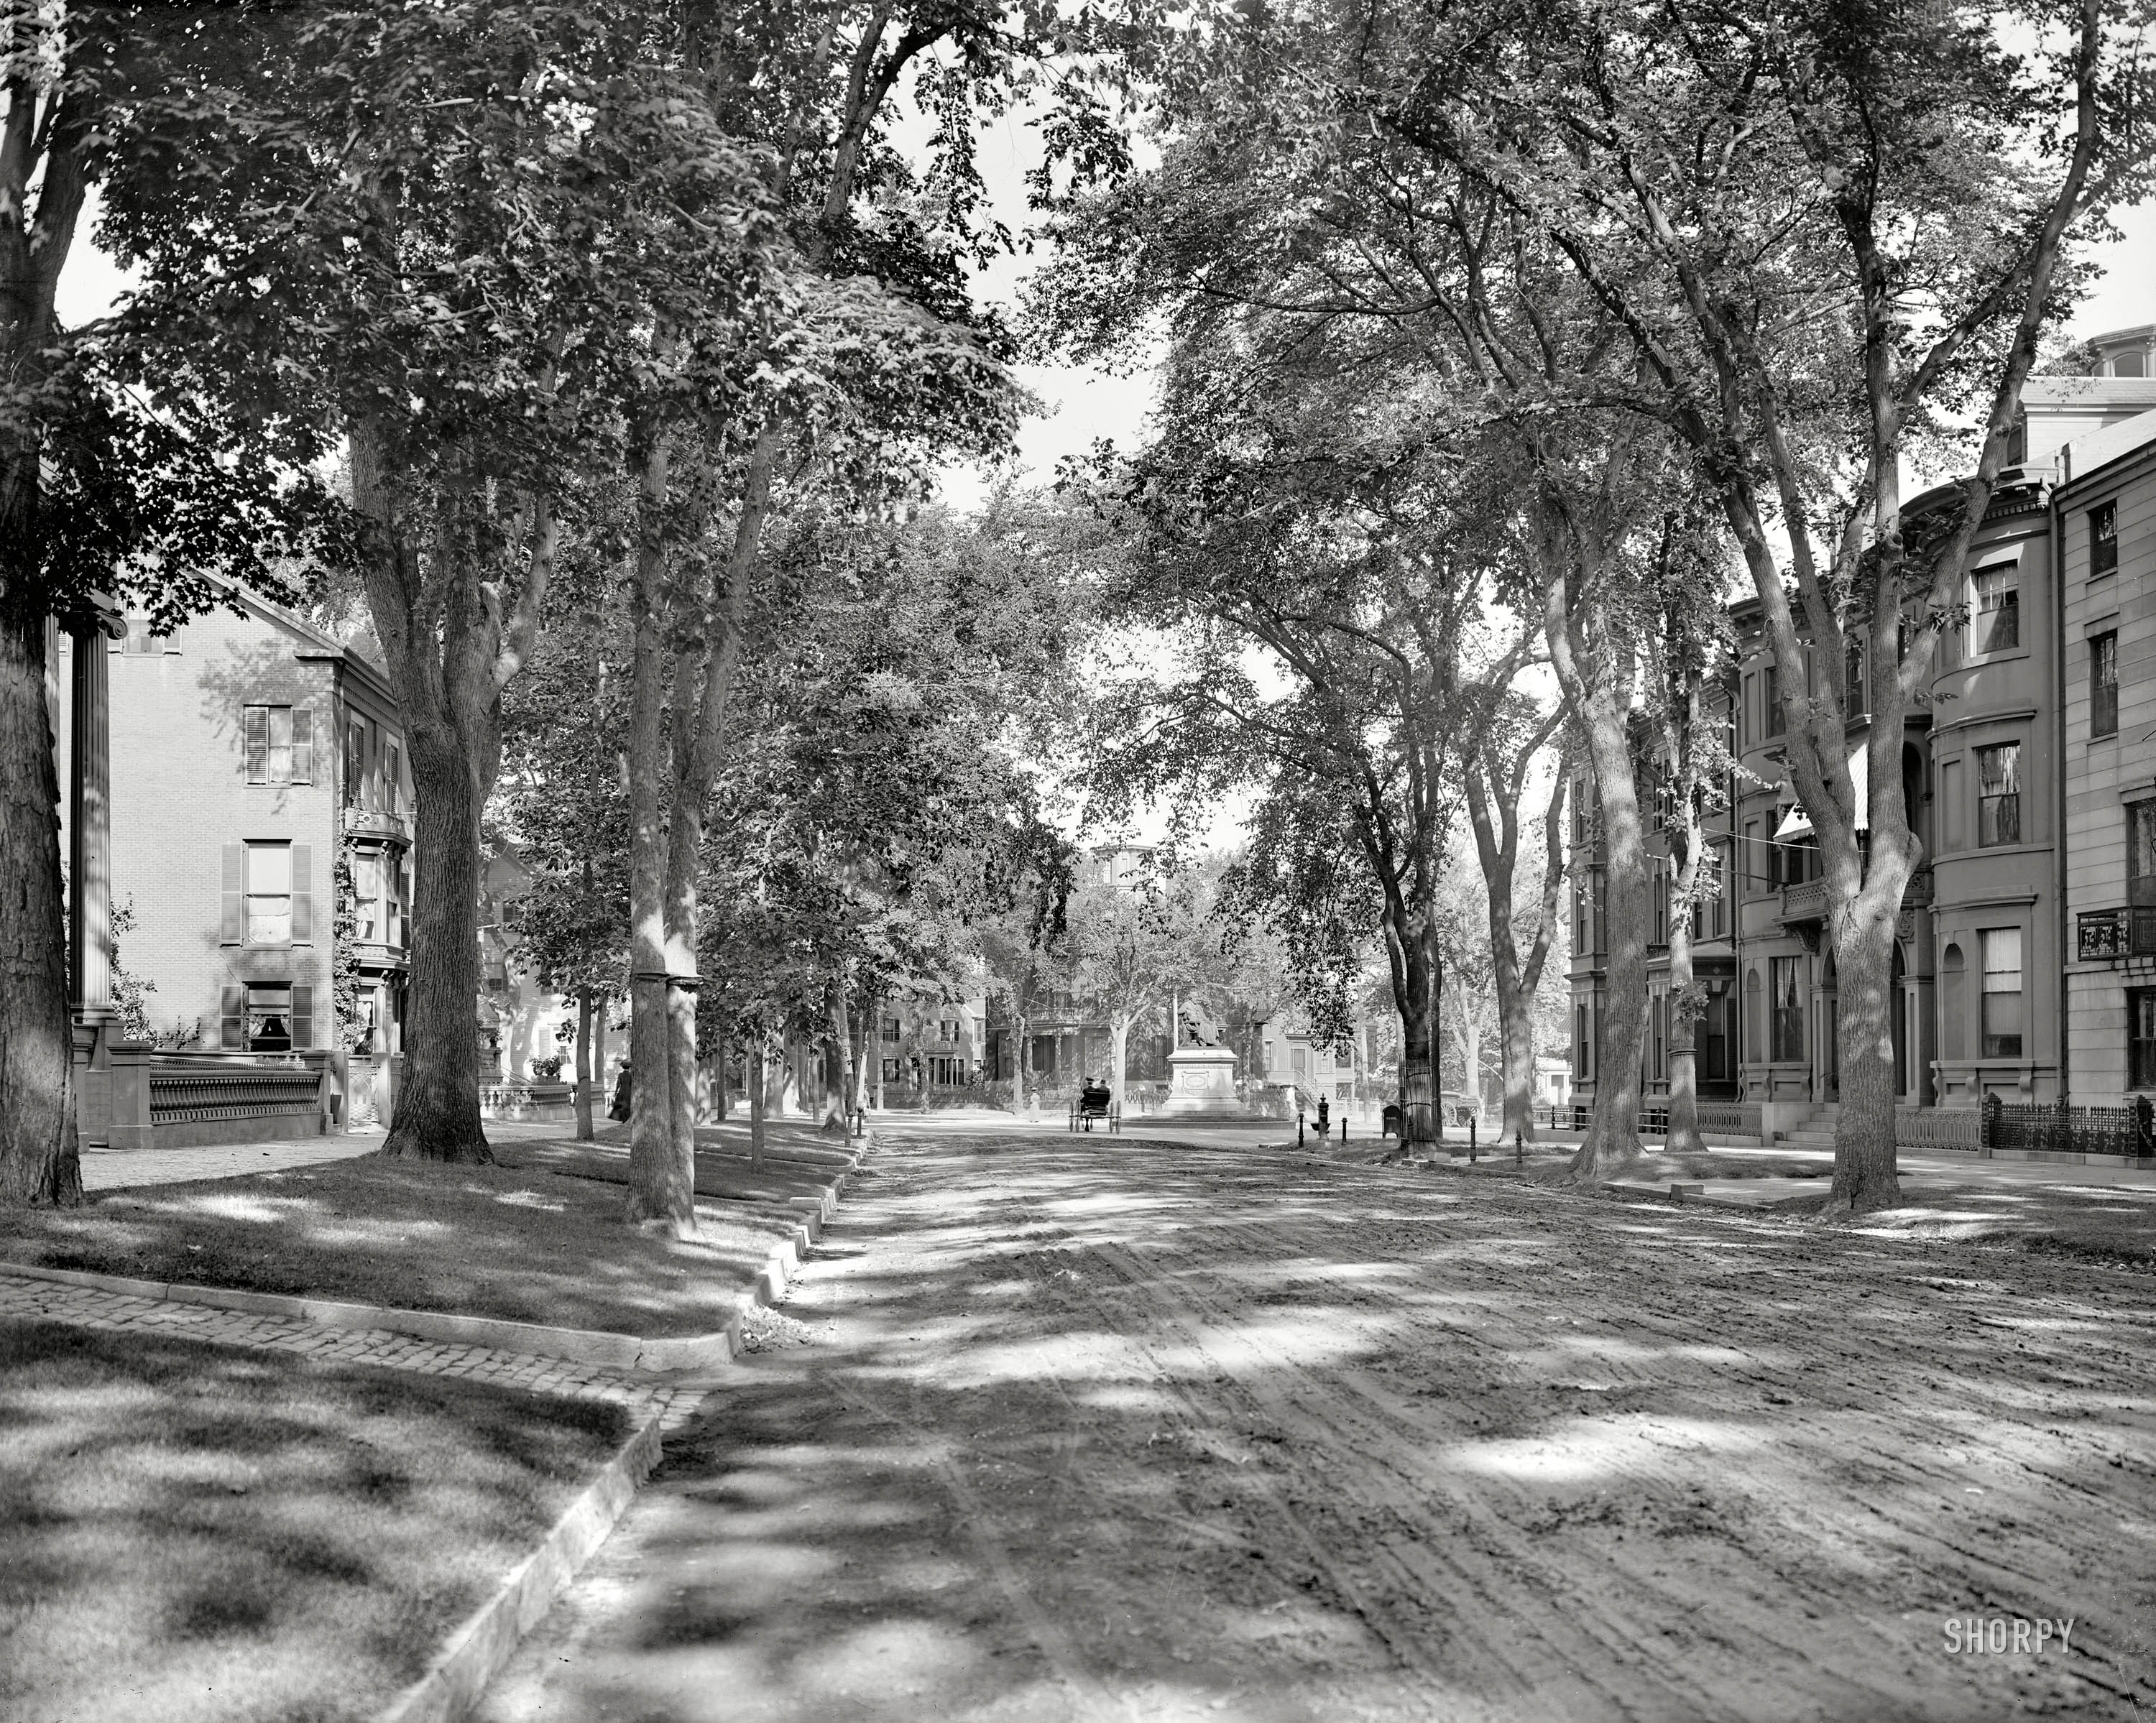 Portland, Maine, circa 1907. "State Street, looking toward Longfellow monument." 8x10 inch dry plate glass negative, Detroit Publishing Company. View full size.